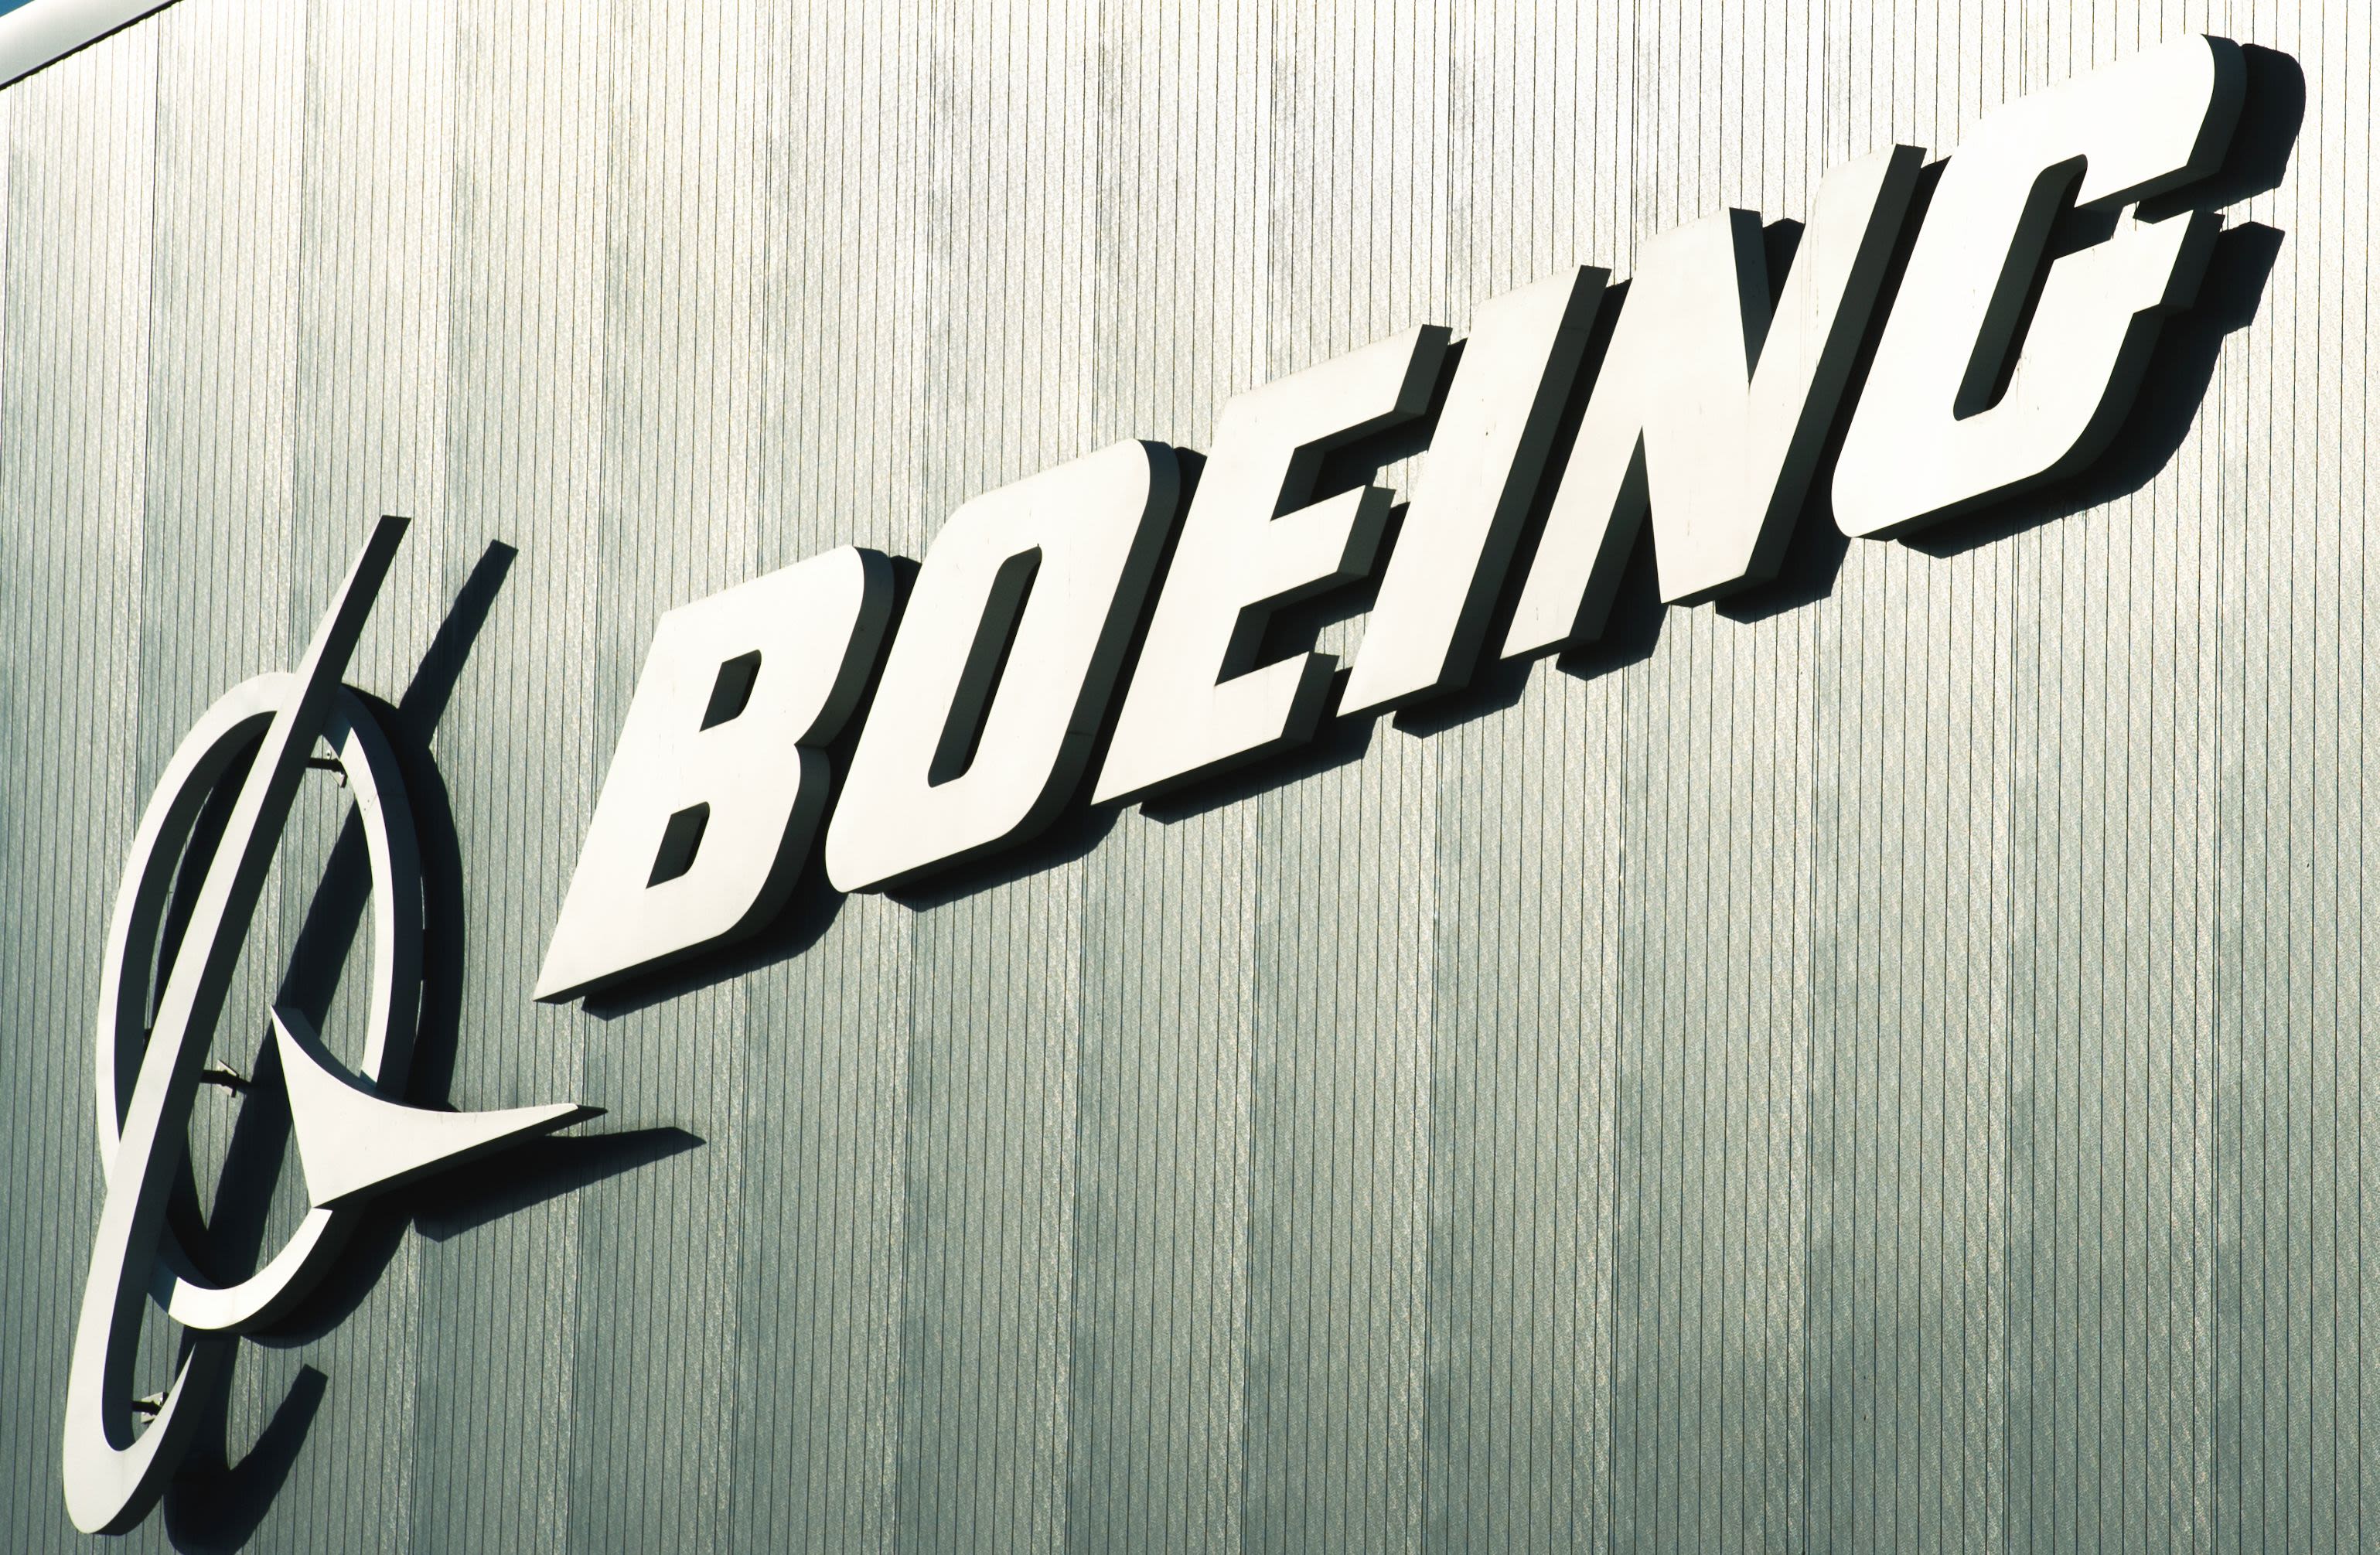 Boeing's Logo - Boeing shares fall sharply after second deadly 737 MAX 8 crash